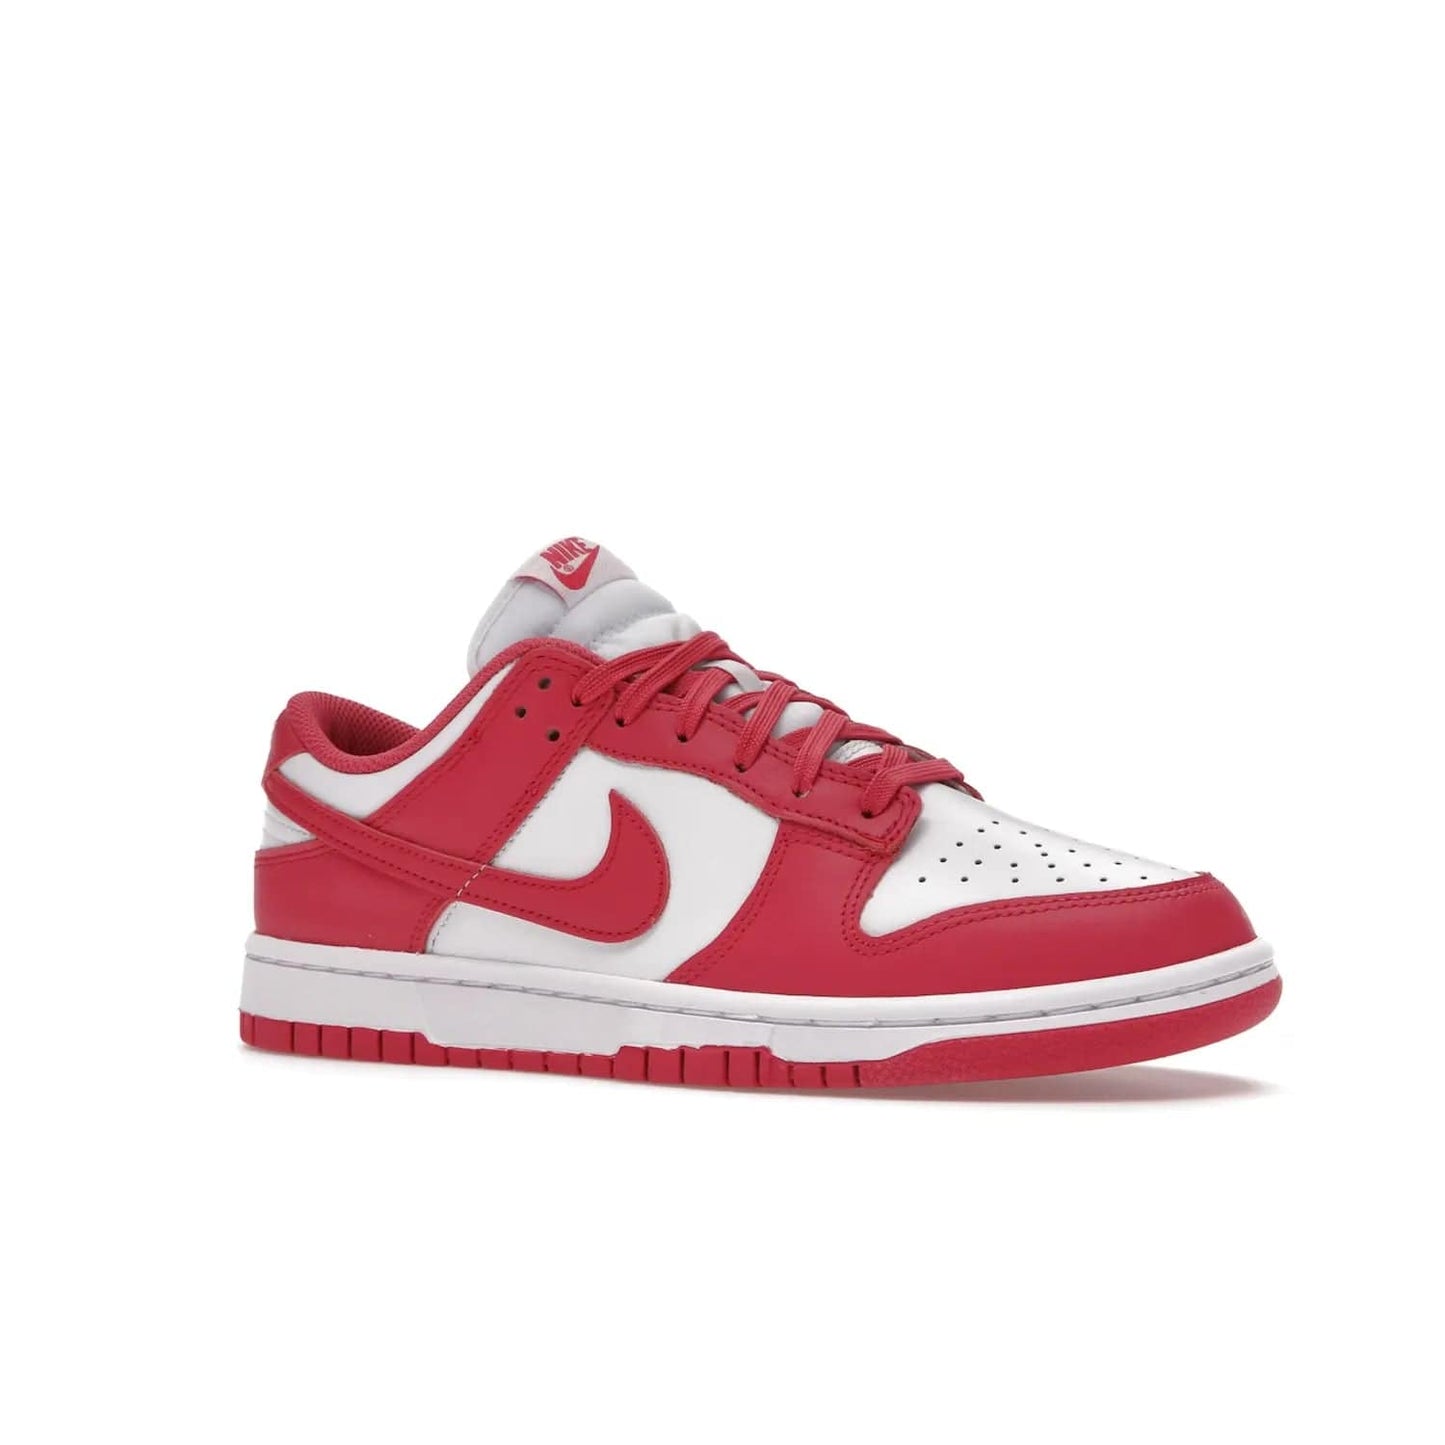 Nike Dunk Low Archeo Pink (Women's) - Image 4 - Only at www.BallersClubKickz.com - Introducing the stylish and comfortable Nike Dunk Low Archeo Pink (Women's). White/Archeo Pink colorway with white leather upper, pink overlays and Swooshes. Get yours now!